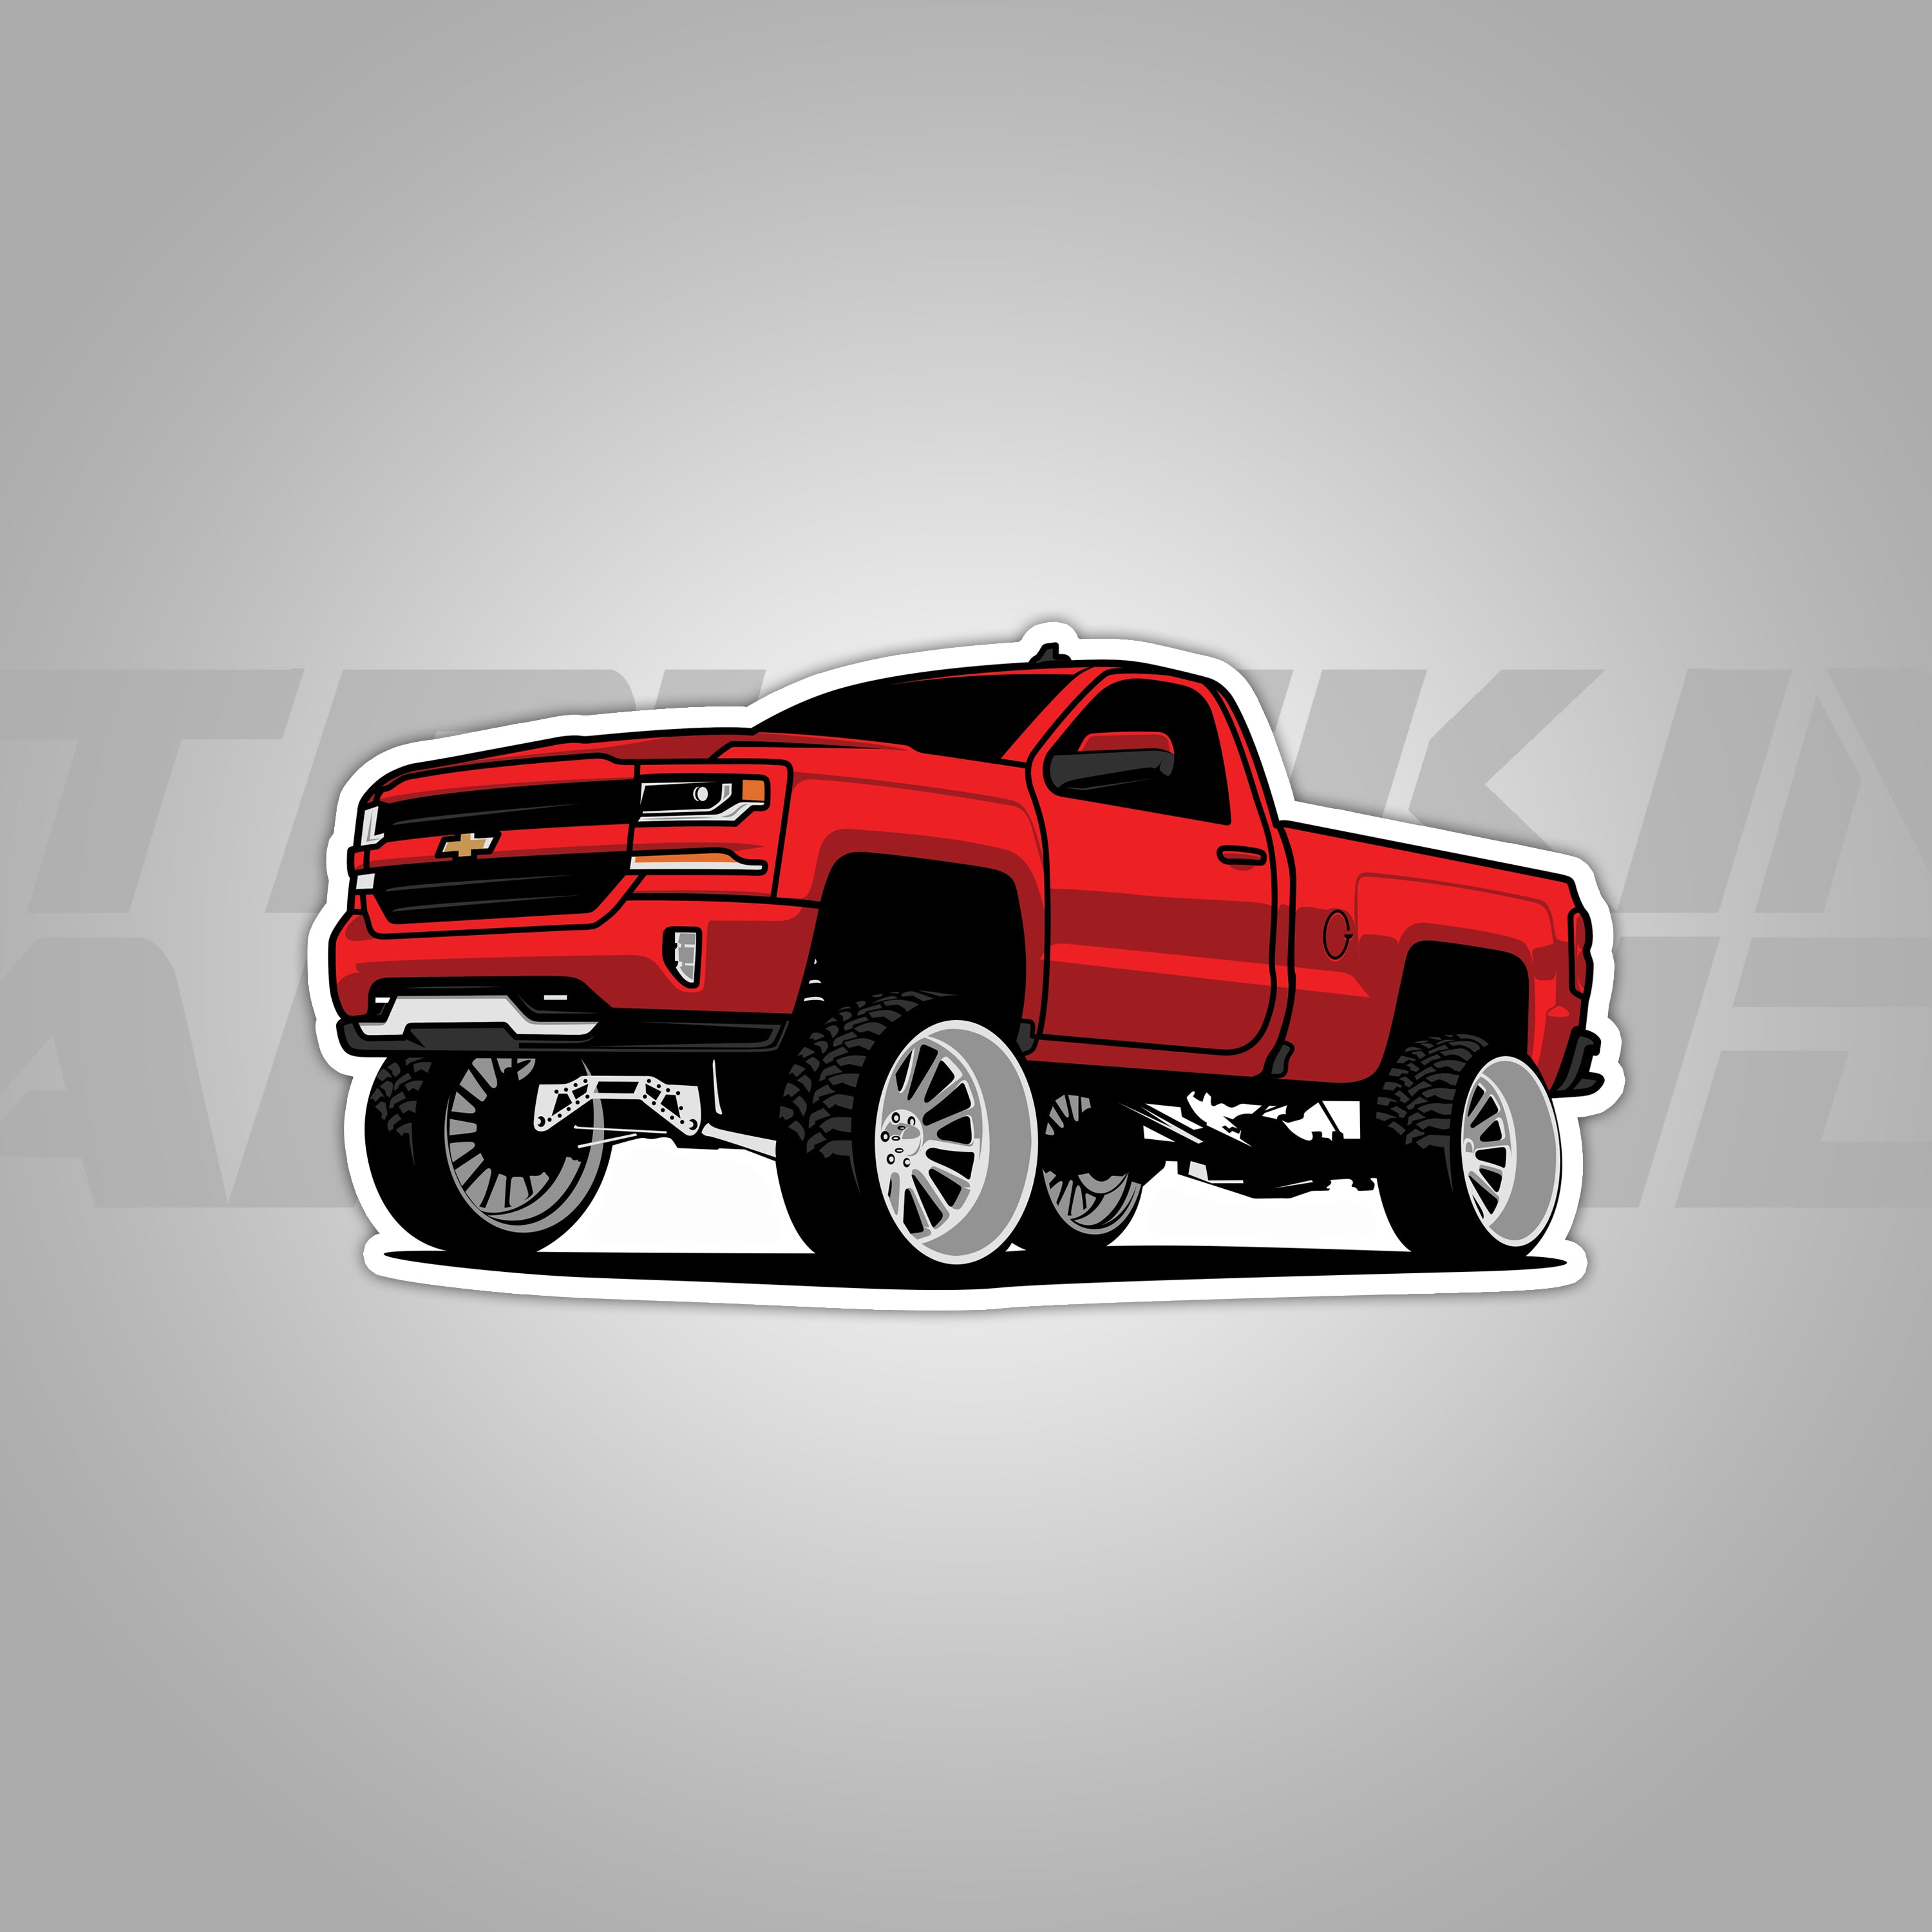 how to draw a lifted truck